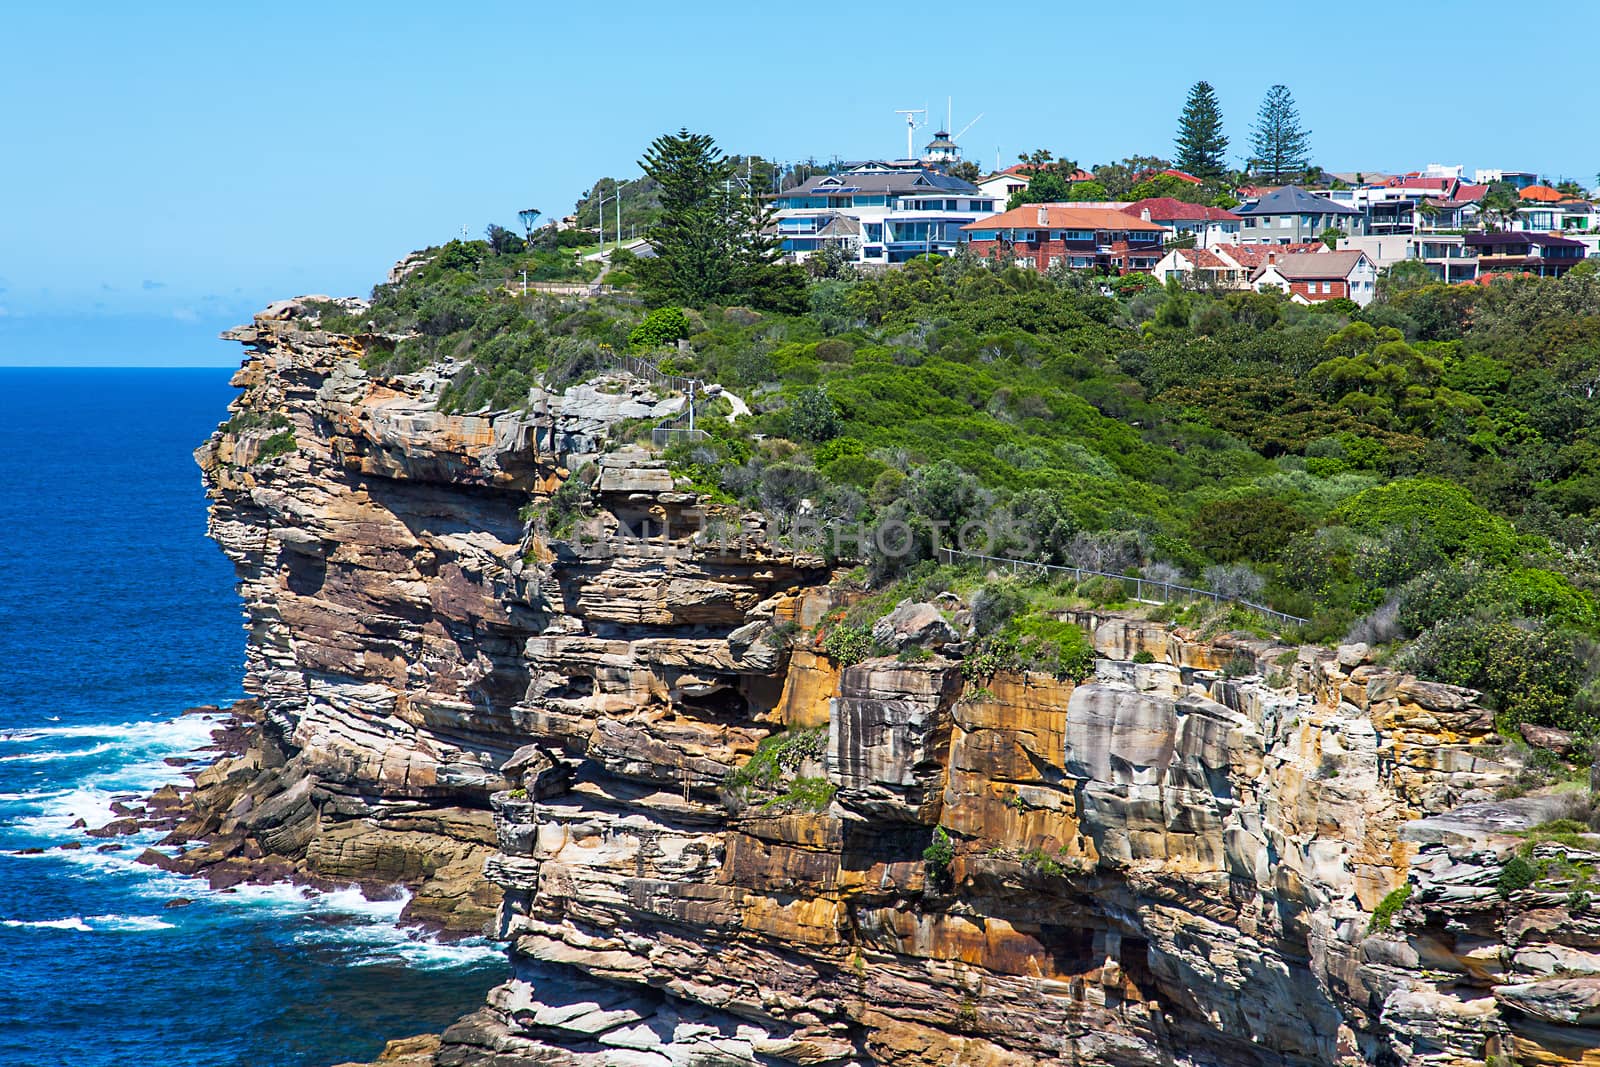 Gap Bluff Harbor National Park Sydney New South Wales Australia by Makeral